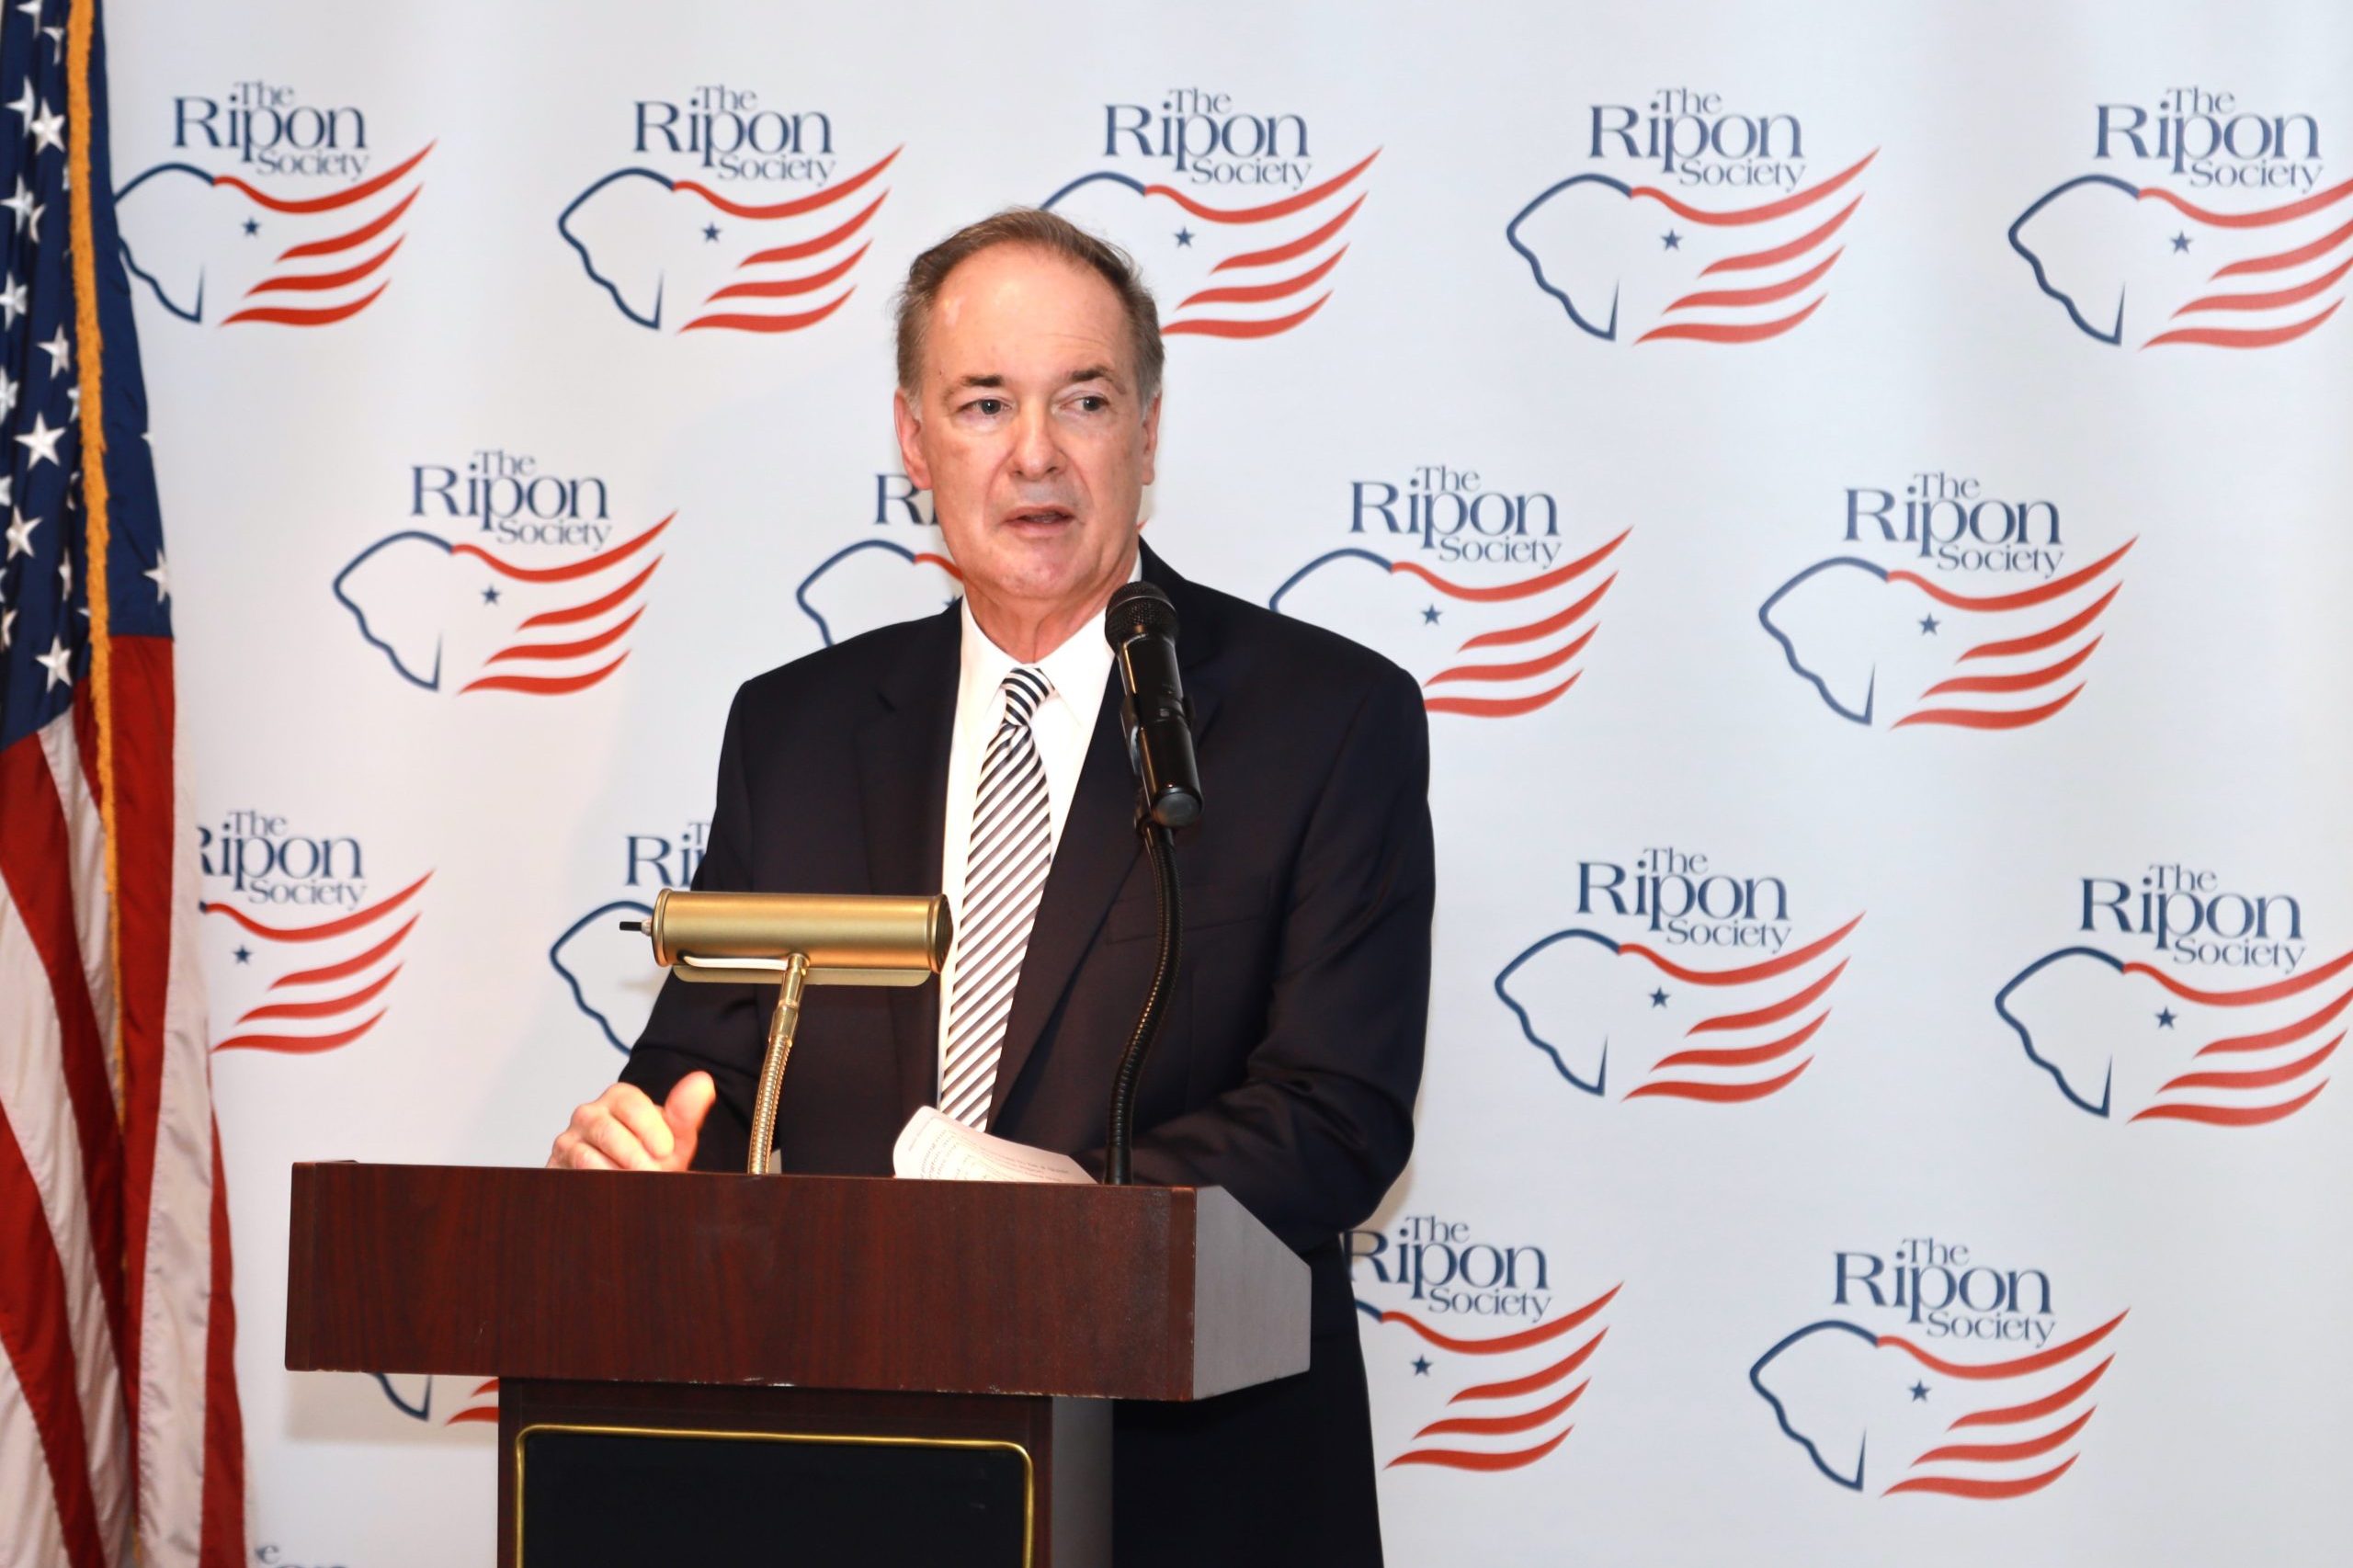 Joyce Leads Efforts to Provide Lifesaving Cures for Americans